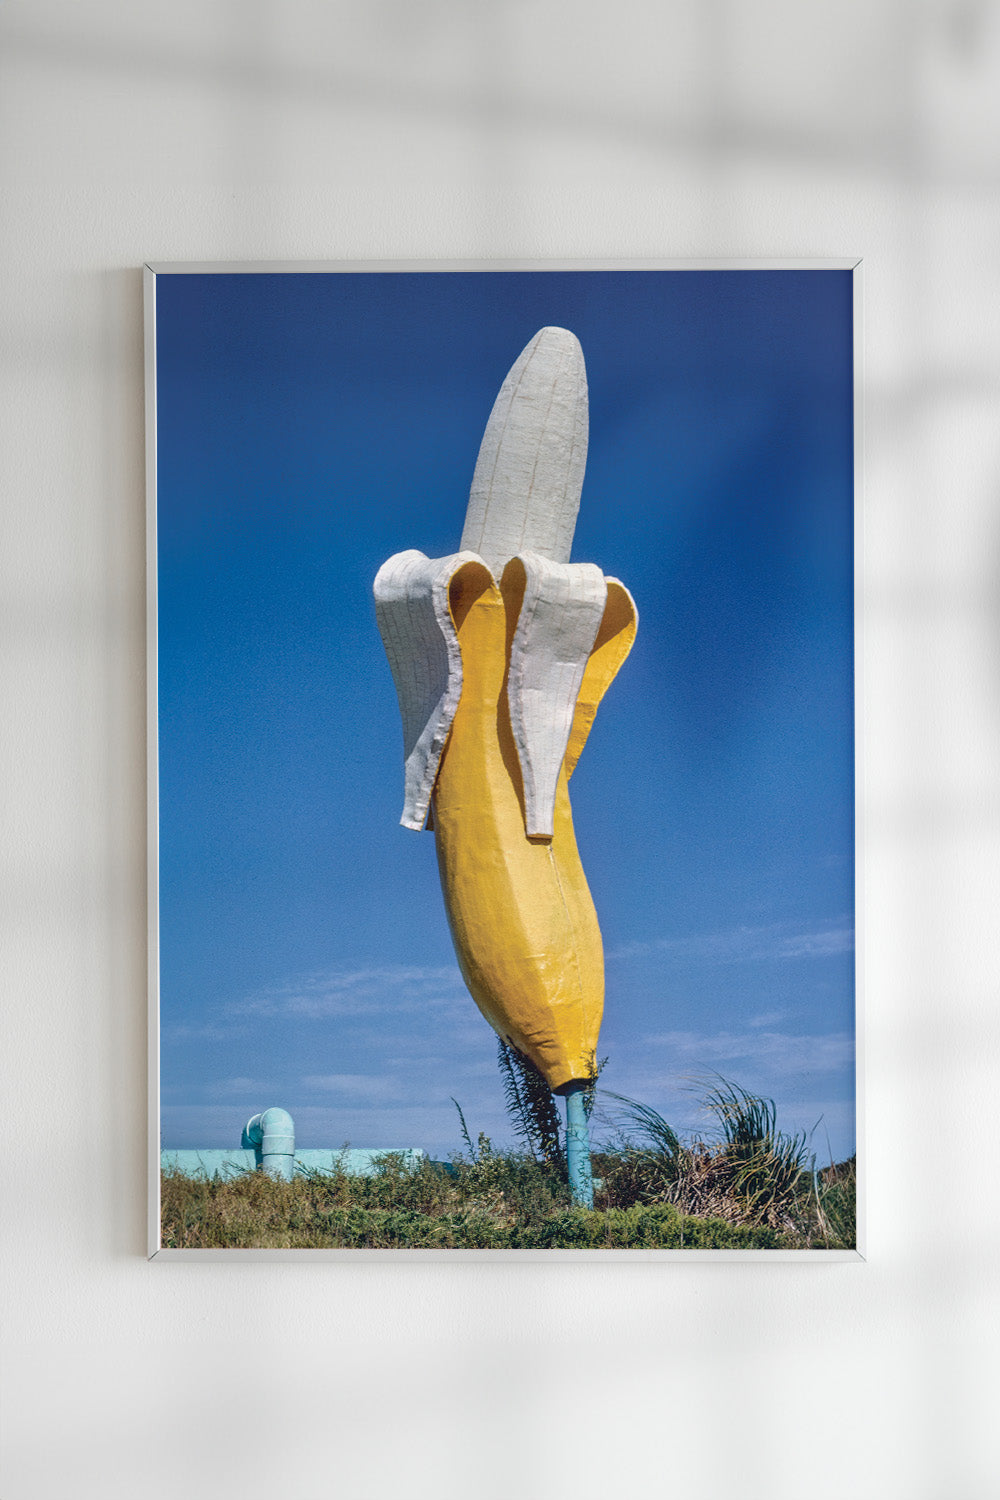 John Margolies' photograph of Banana Waterslide roadside attraction with bright blue sky.